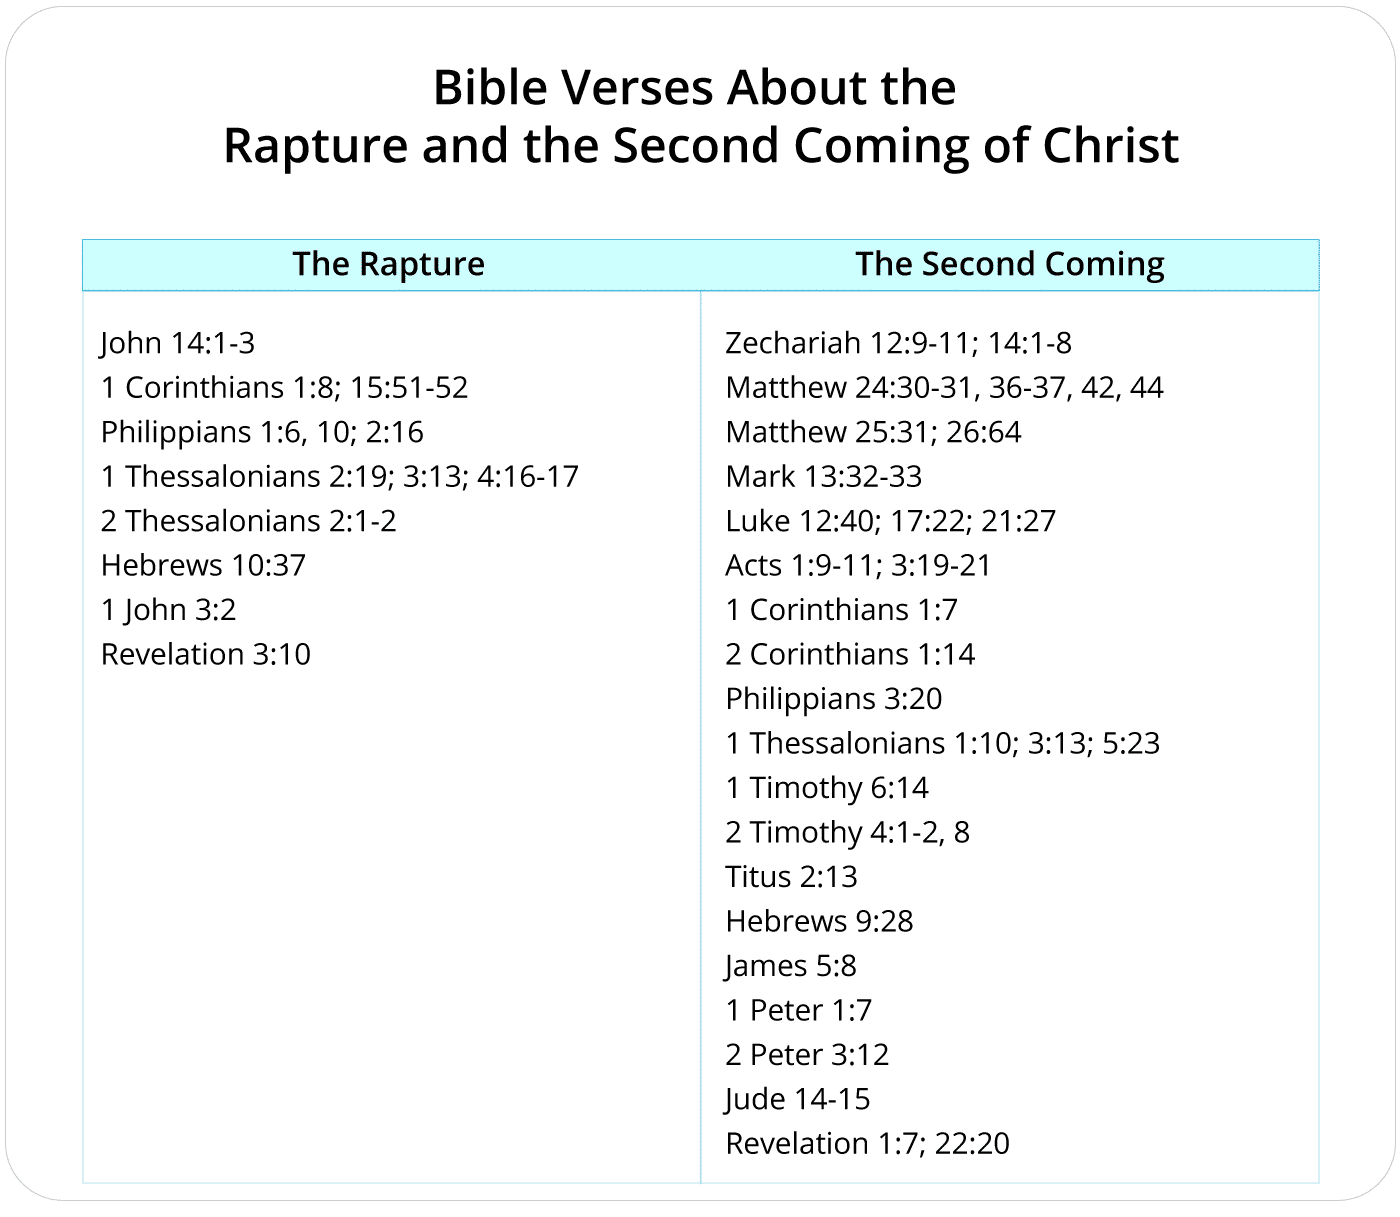 All the Bible Verses About the Rapture and the Second Coming of Christ